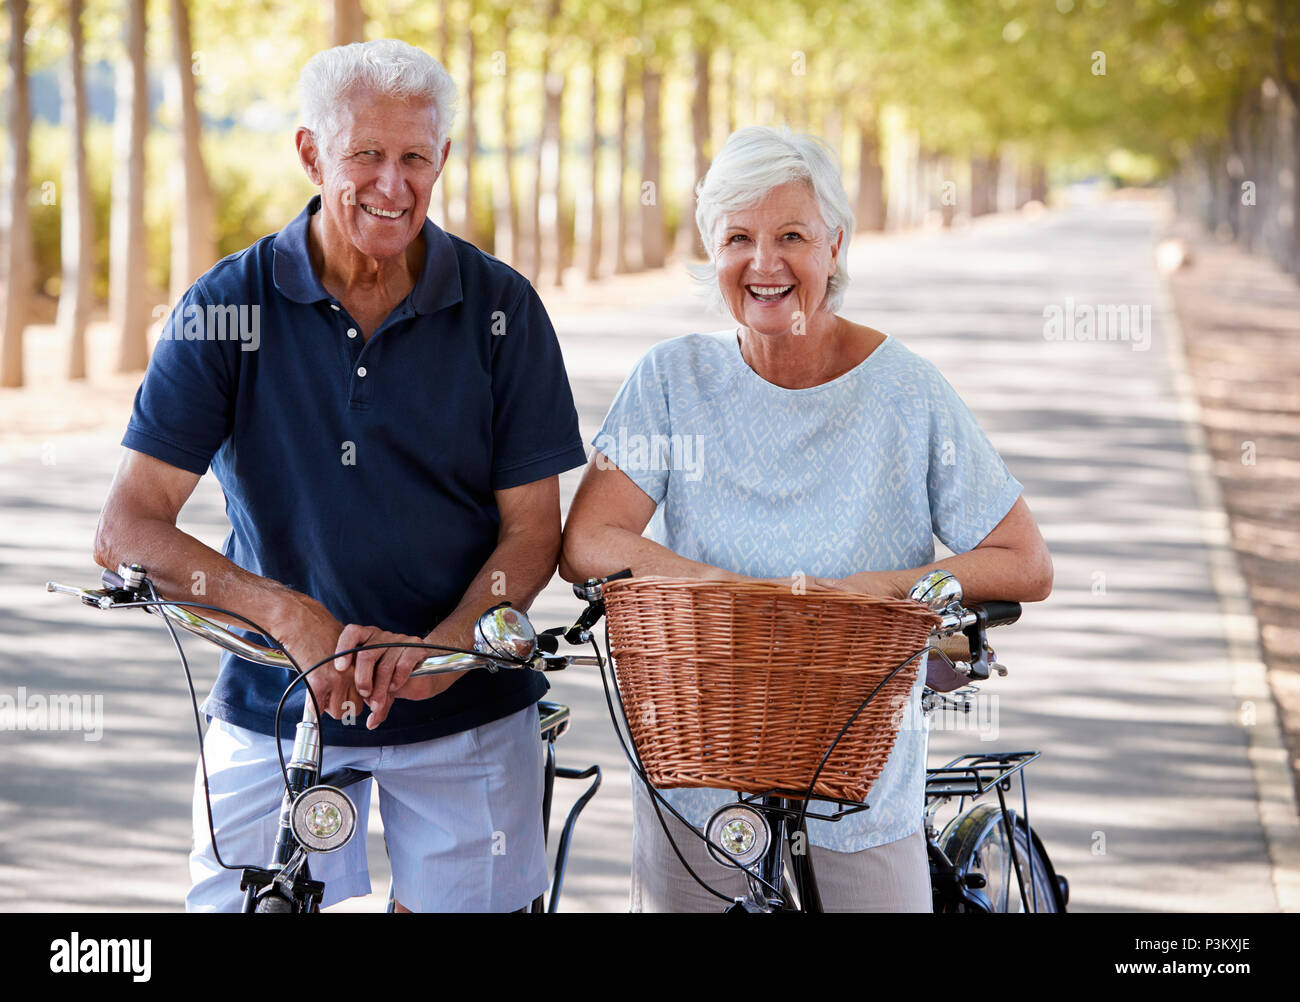 Portrait Of Smiling Senior Couple Cycling On Country Road Banque D'Images